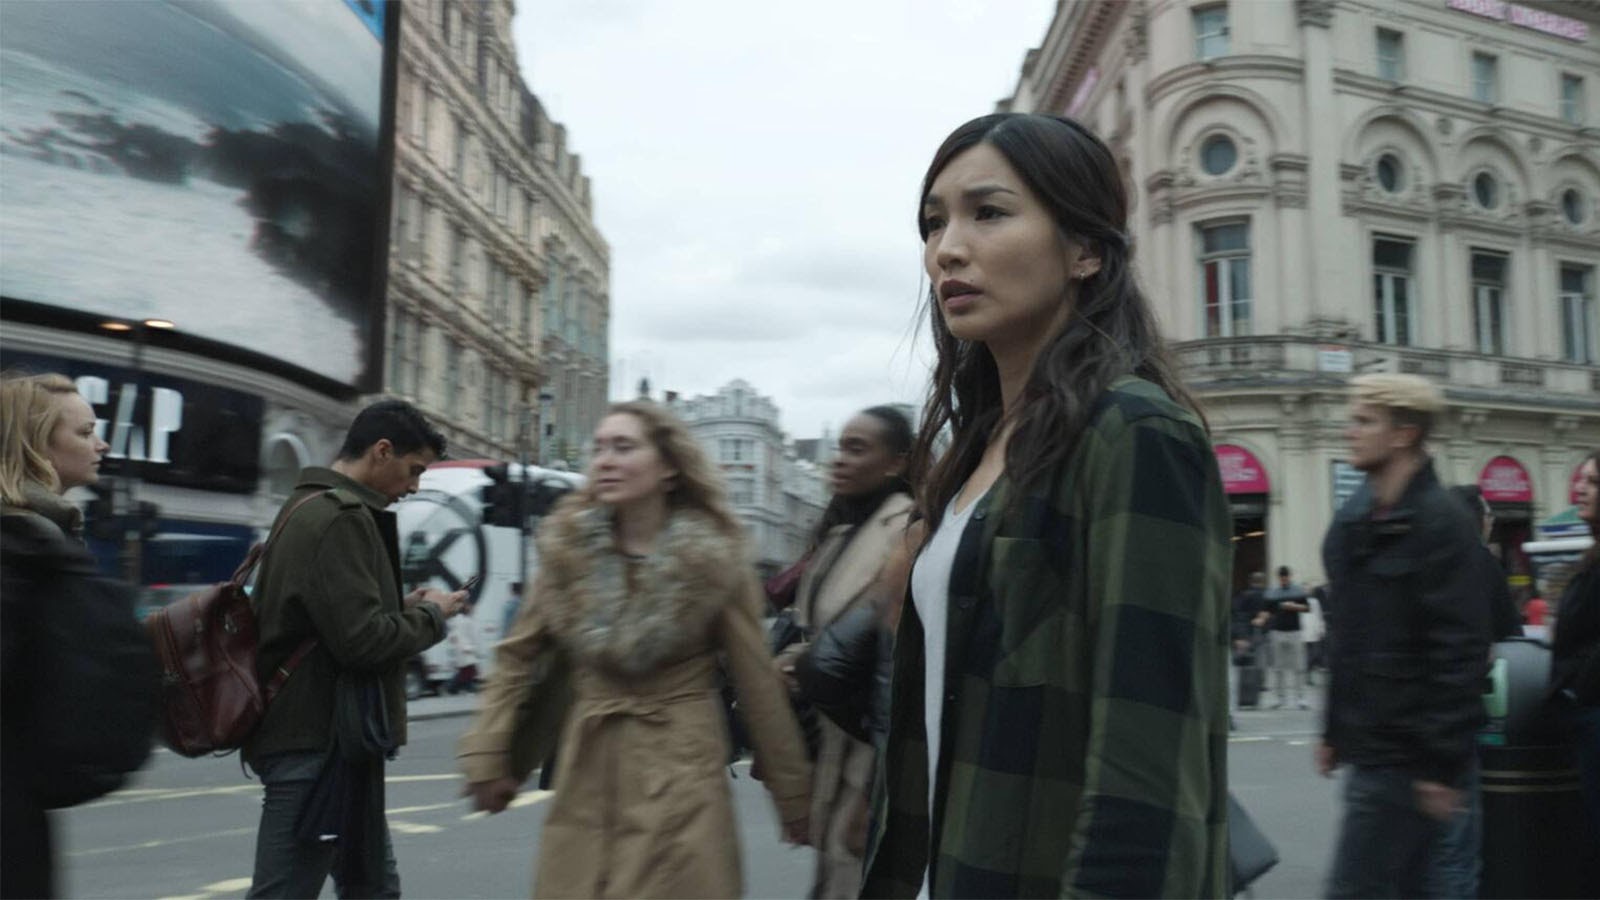 Sersi (Gemma Chan) looks around Piccadilly Circus in London. 